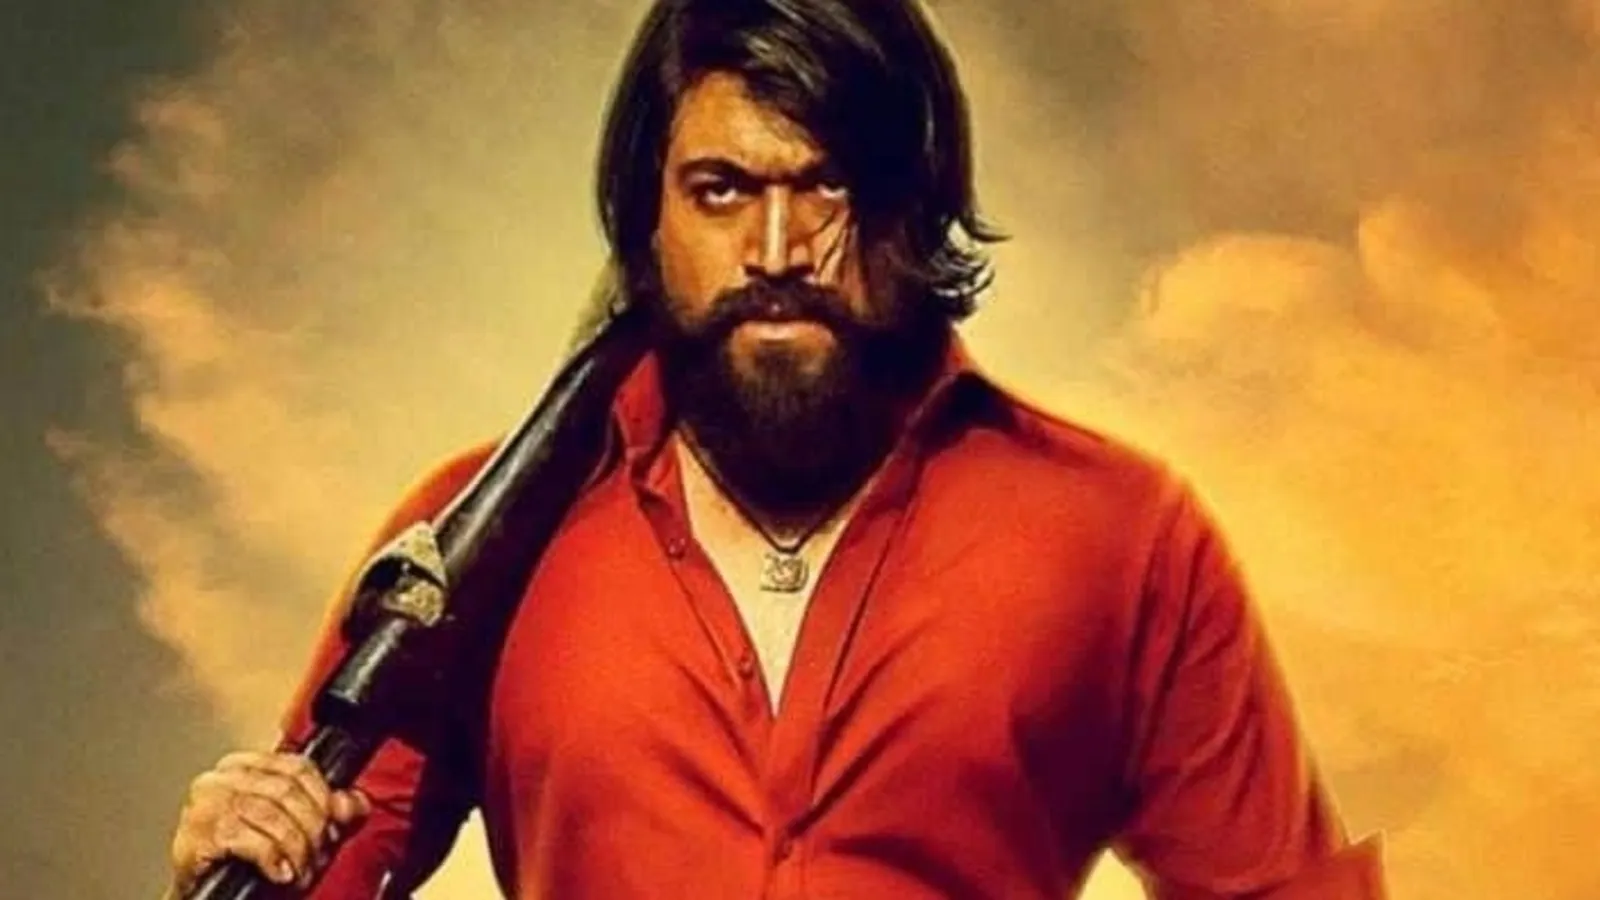 KGF Chapter 2 (Hindi) beats all post-pandemic films’ day 1 gross even before release, earns ₹20 crore in advance booking